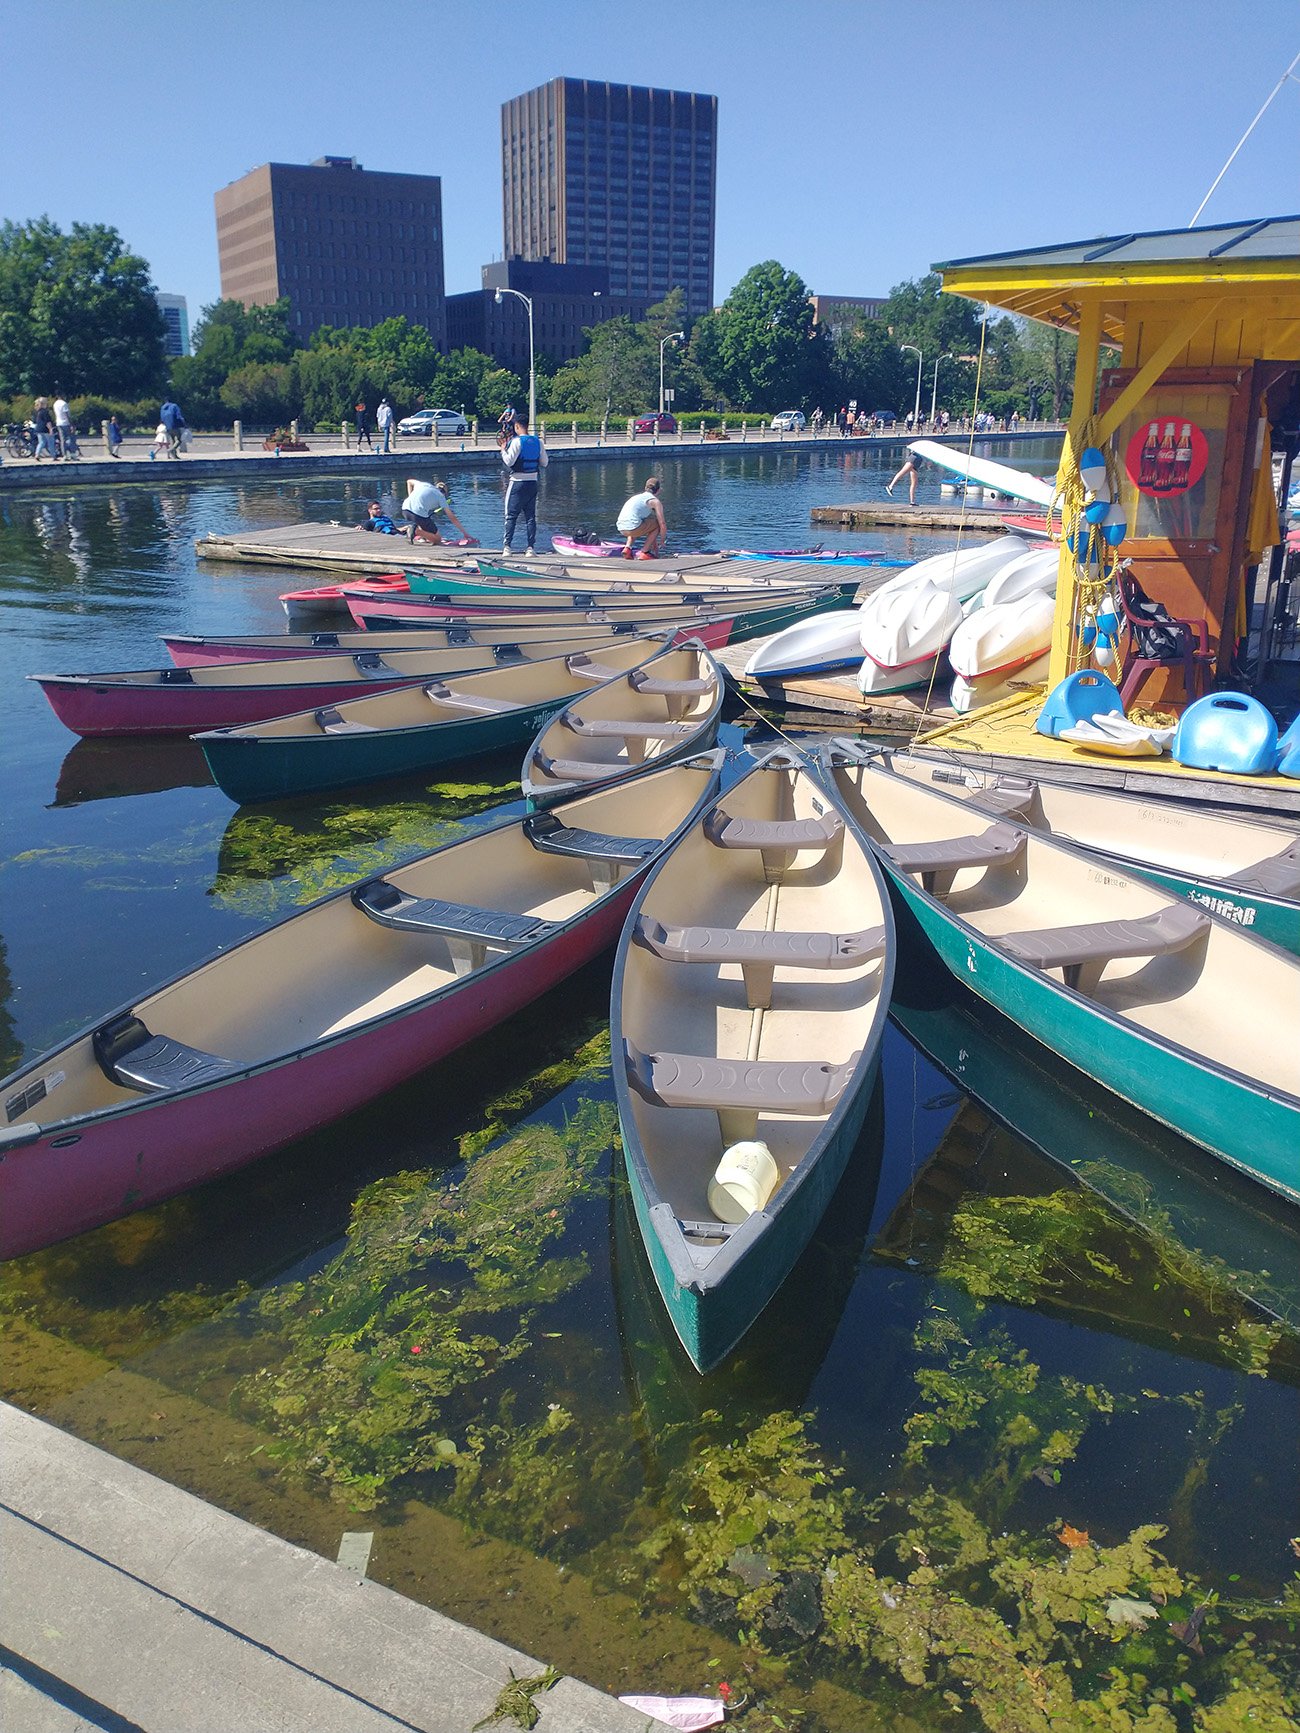 Canoe/Kayak rental very popular in the Gatineau/Ottawa area. Saw tons of people paddling around the canal.